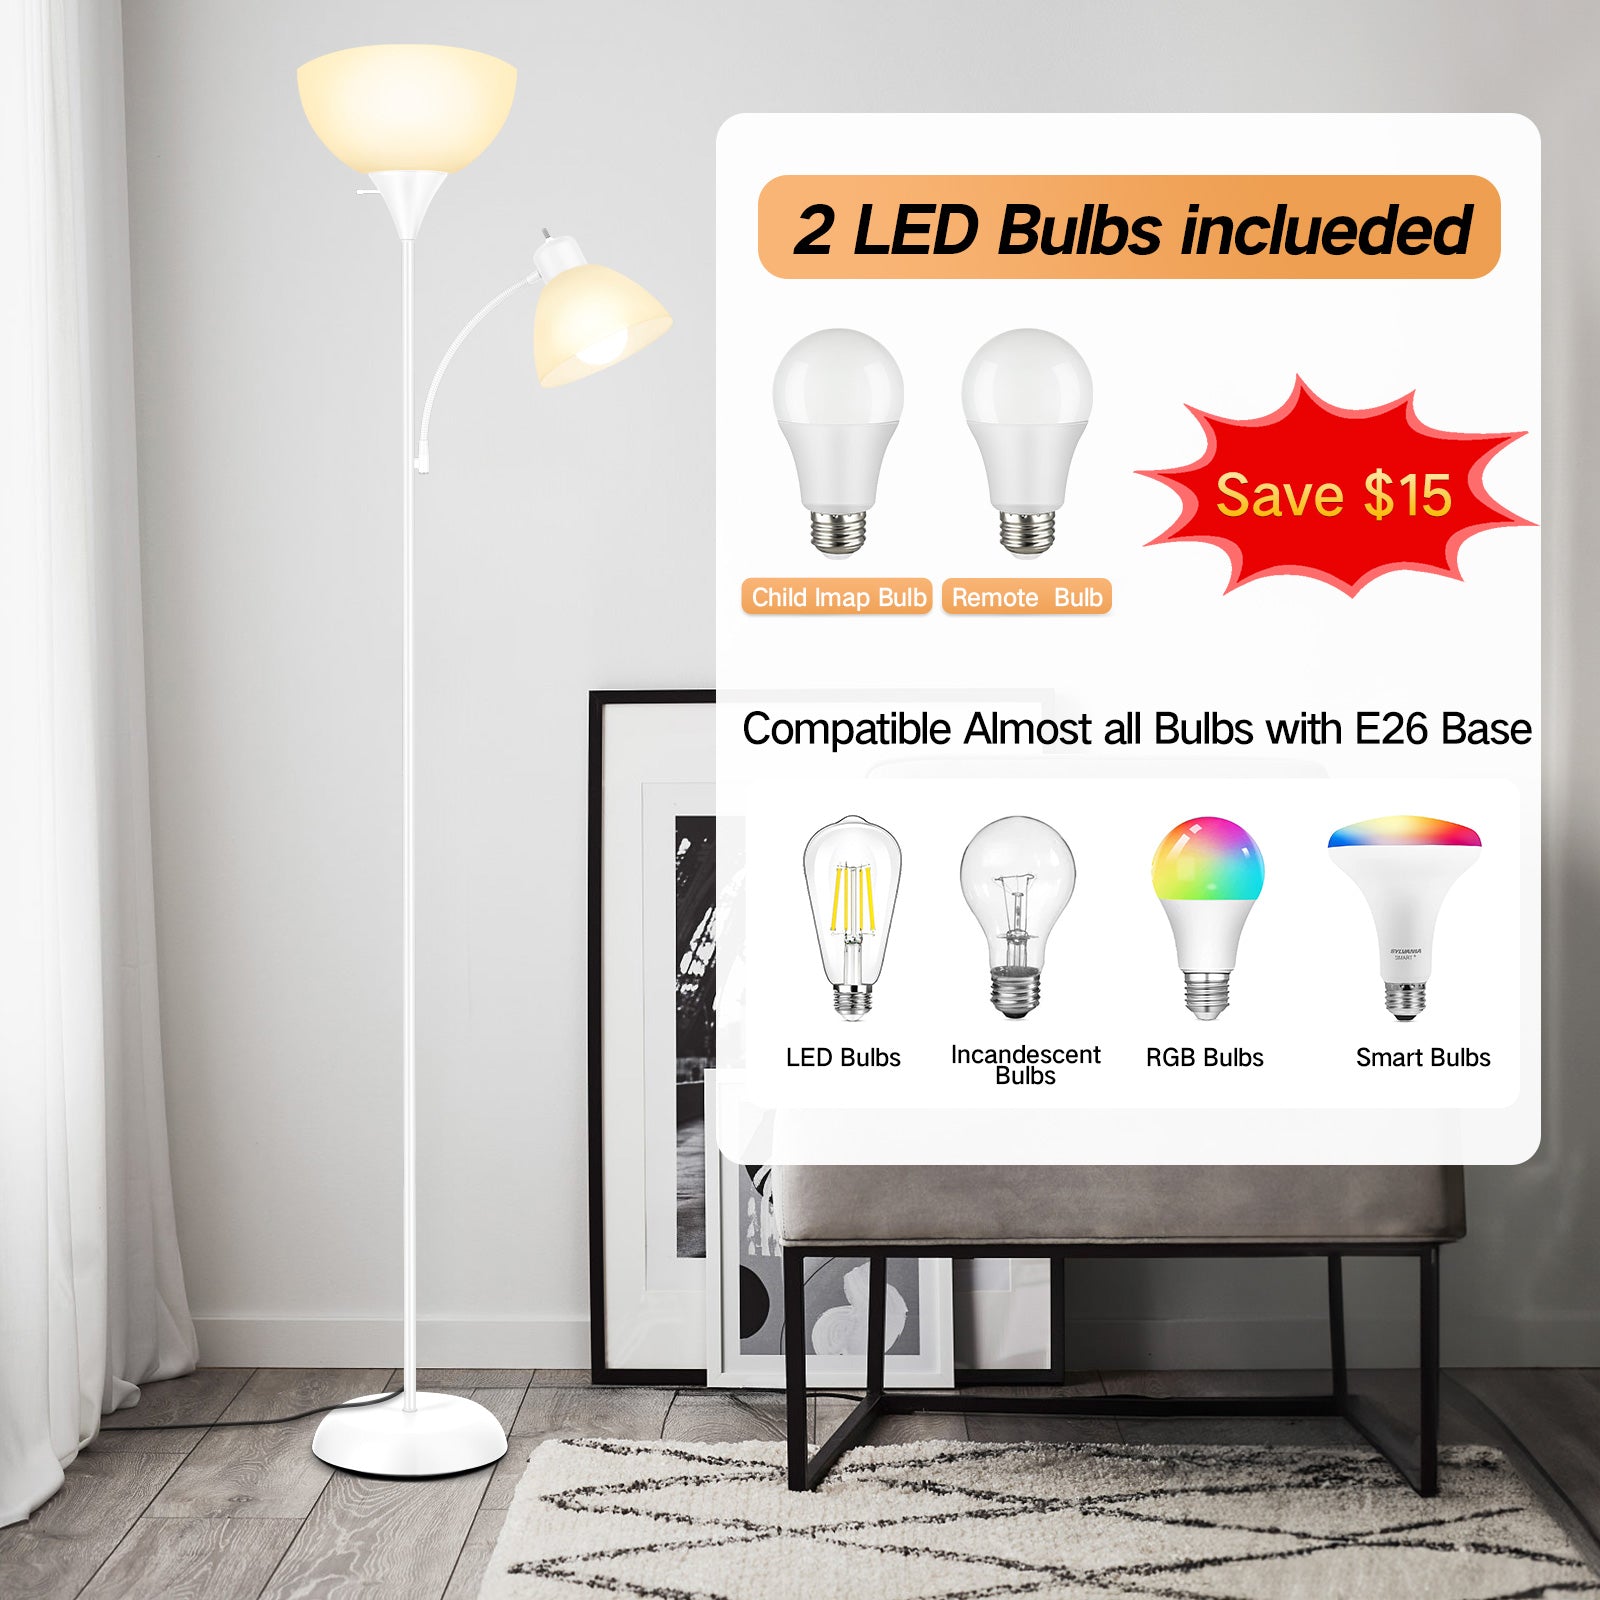 OUTON Dimmable Floor Lamp with Reading Lamp, Remote Control, 3 Color Temperatures, 2 x 9W Energy-Saving LED Bulbs, Modern Standing Tall Lamp for Living Rooms & Bedroom, Office (White)